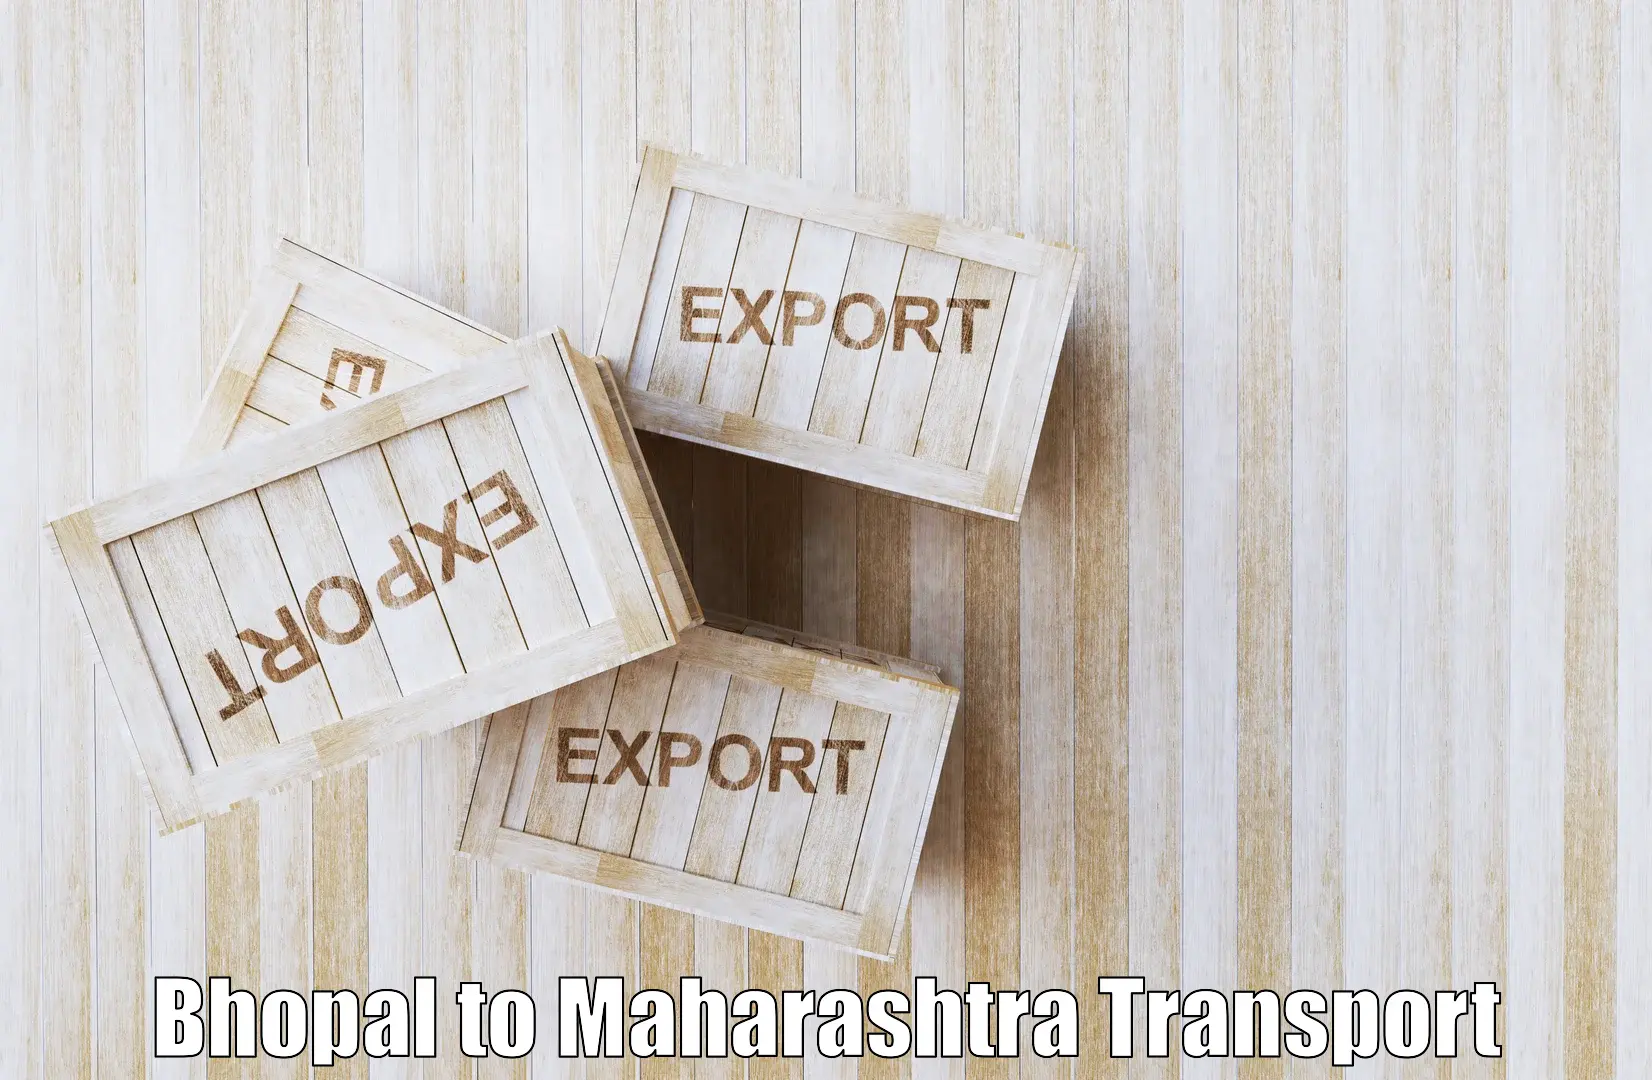 Container transport service Bhopal to Alephata